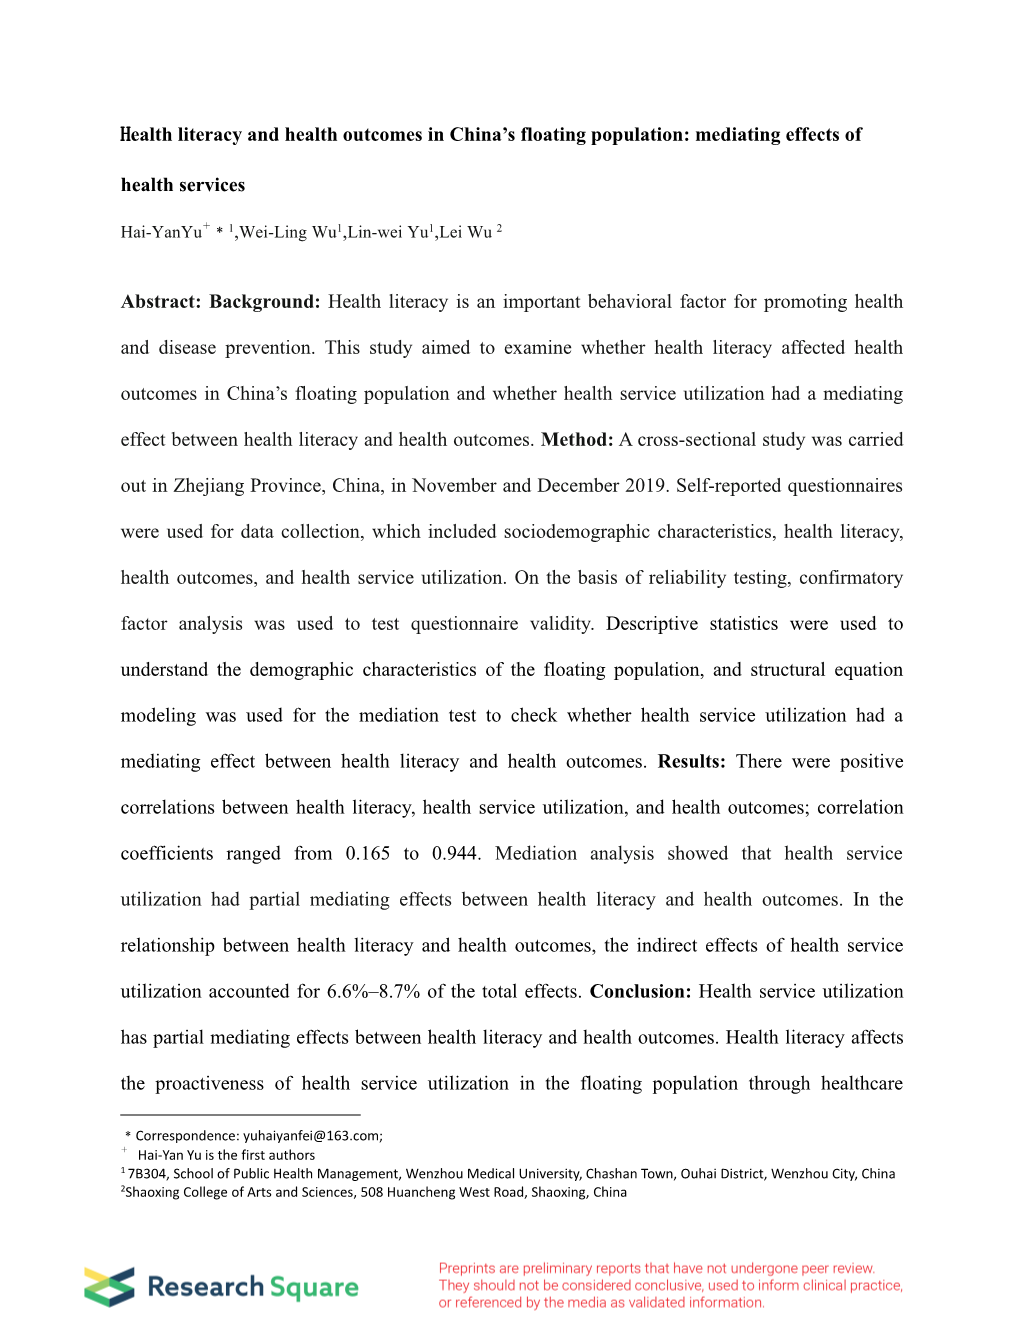 Health Literacy and Health Outcomes in China's Floating Population: Mediating Effects of Health Services Abstract: Background